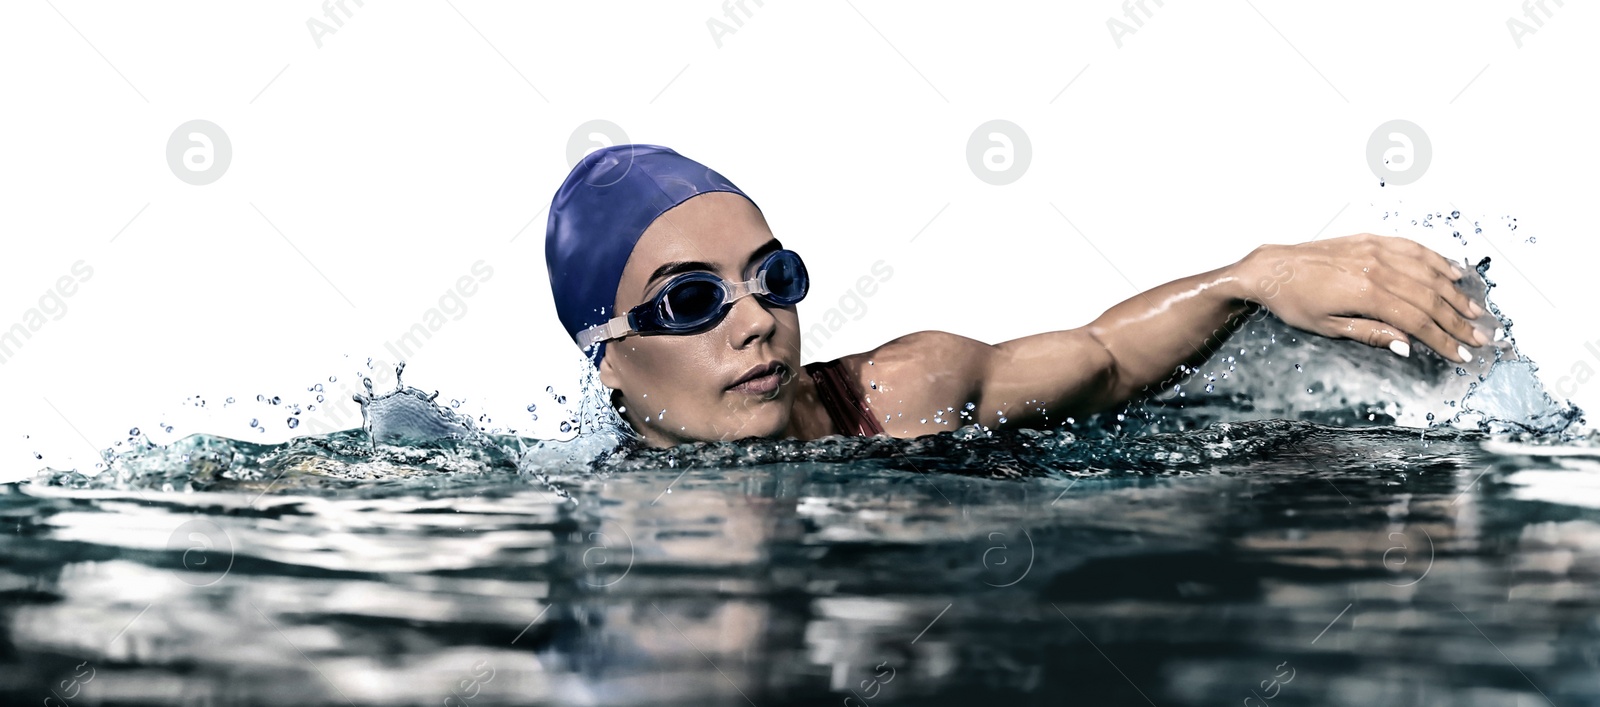 Image of Young athletic woman swimming in pool against white background. Banner design